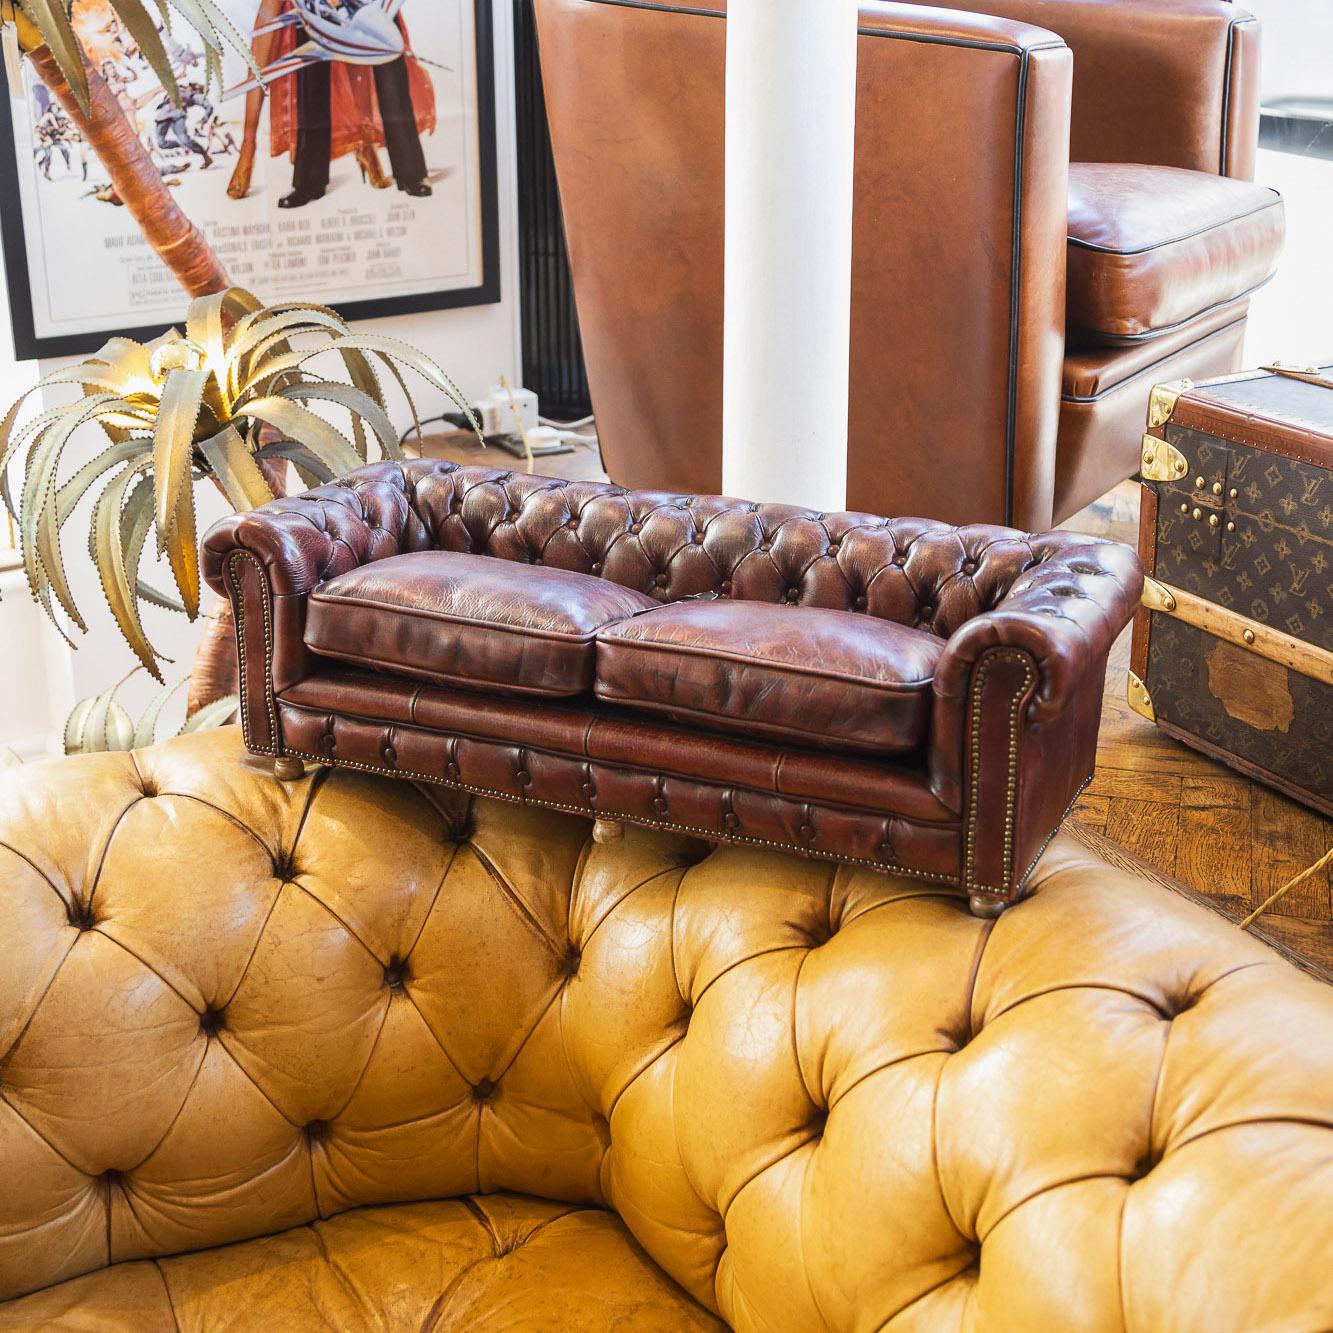 A superb 20th century Timothy Oulton leather mini chesterfield sofa. One of the most elegant models with soft cushion seating, this is a fashionable yet quirky item of furniture capable of uplifting the interior space of any contemporary or